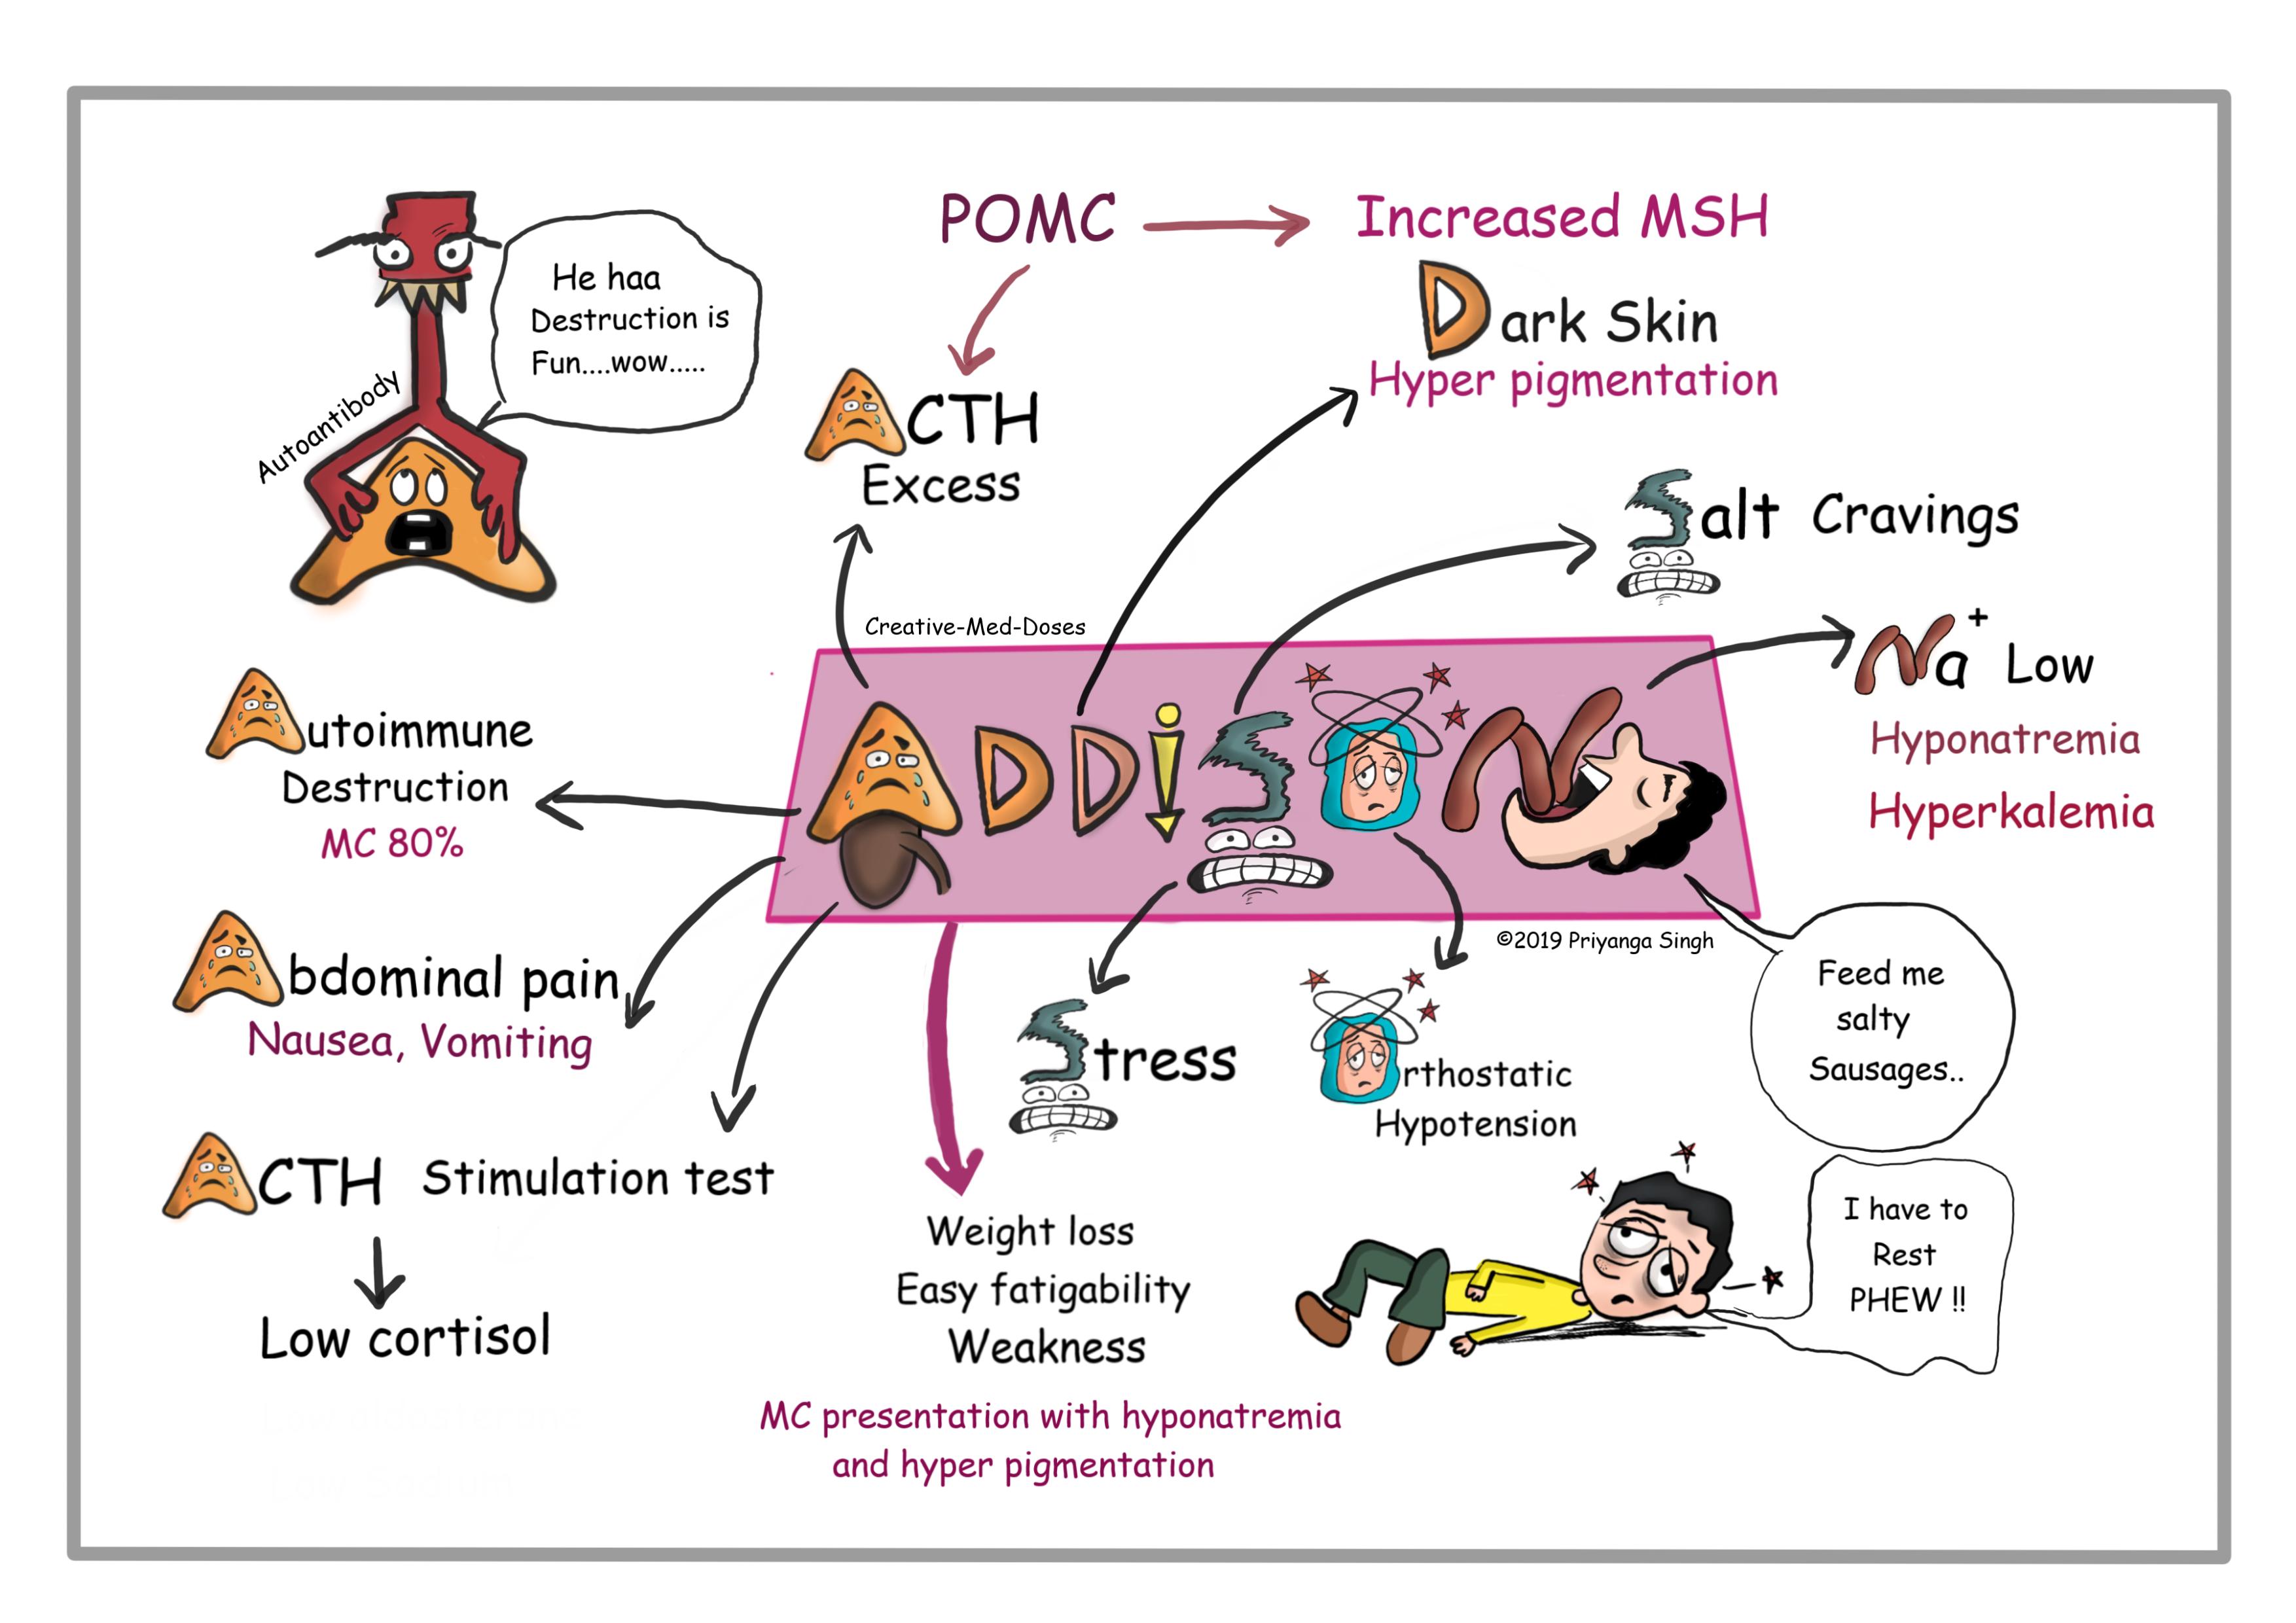 Addison disease - visual map describes most common causes and presenting features.